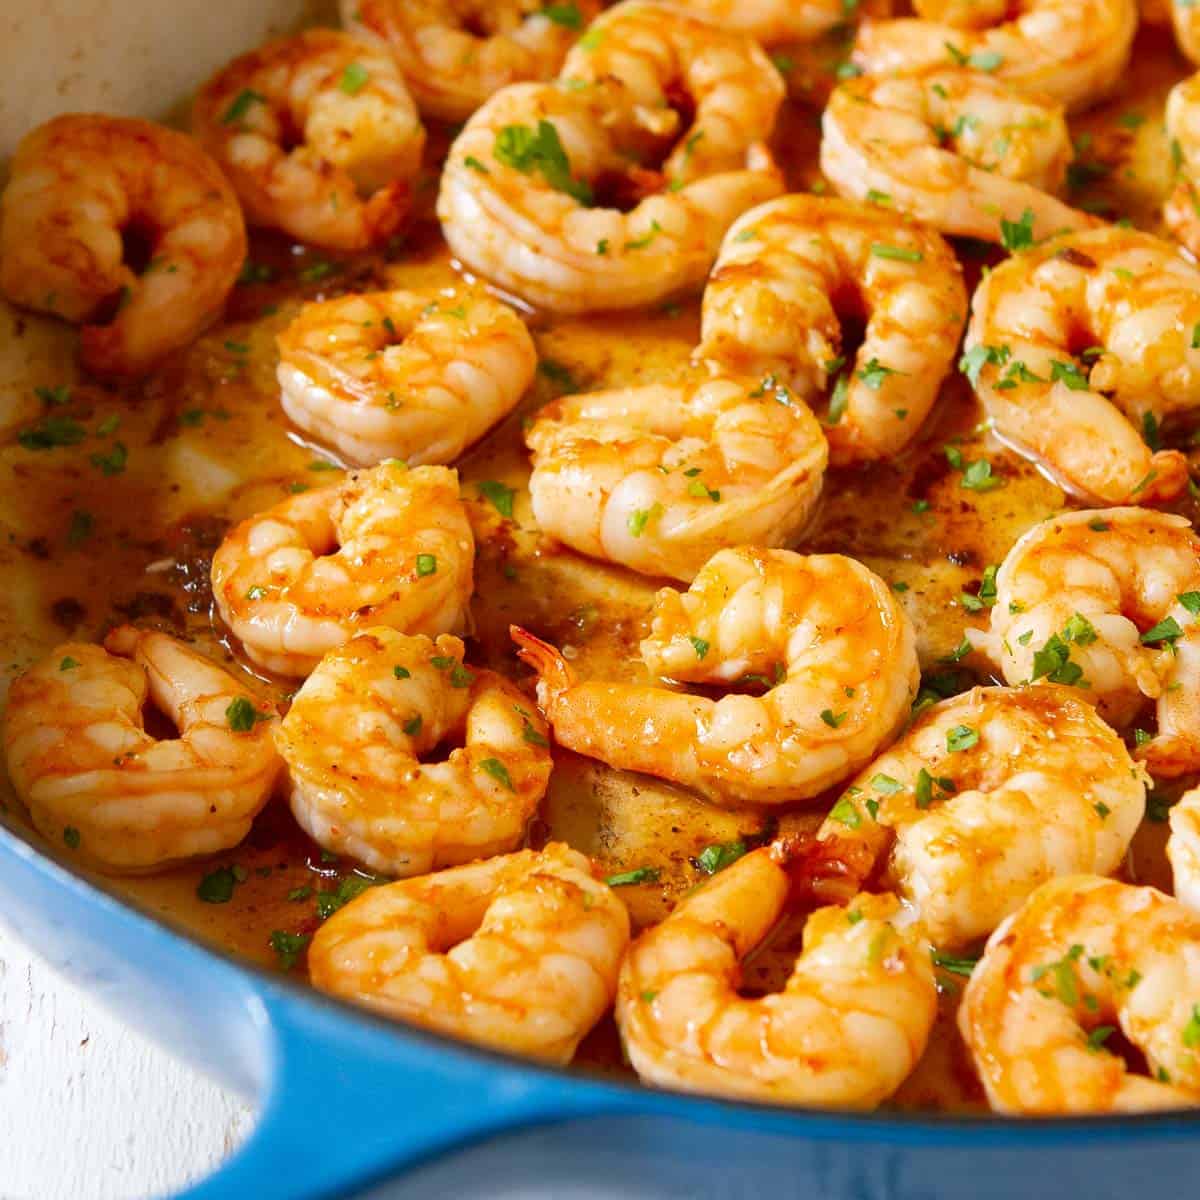 Cooked paprika shrimp and sauce in a large blue skillet.